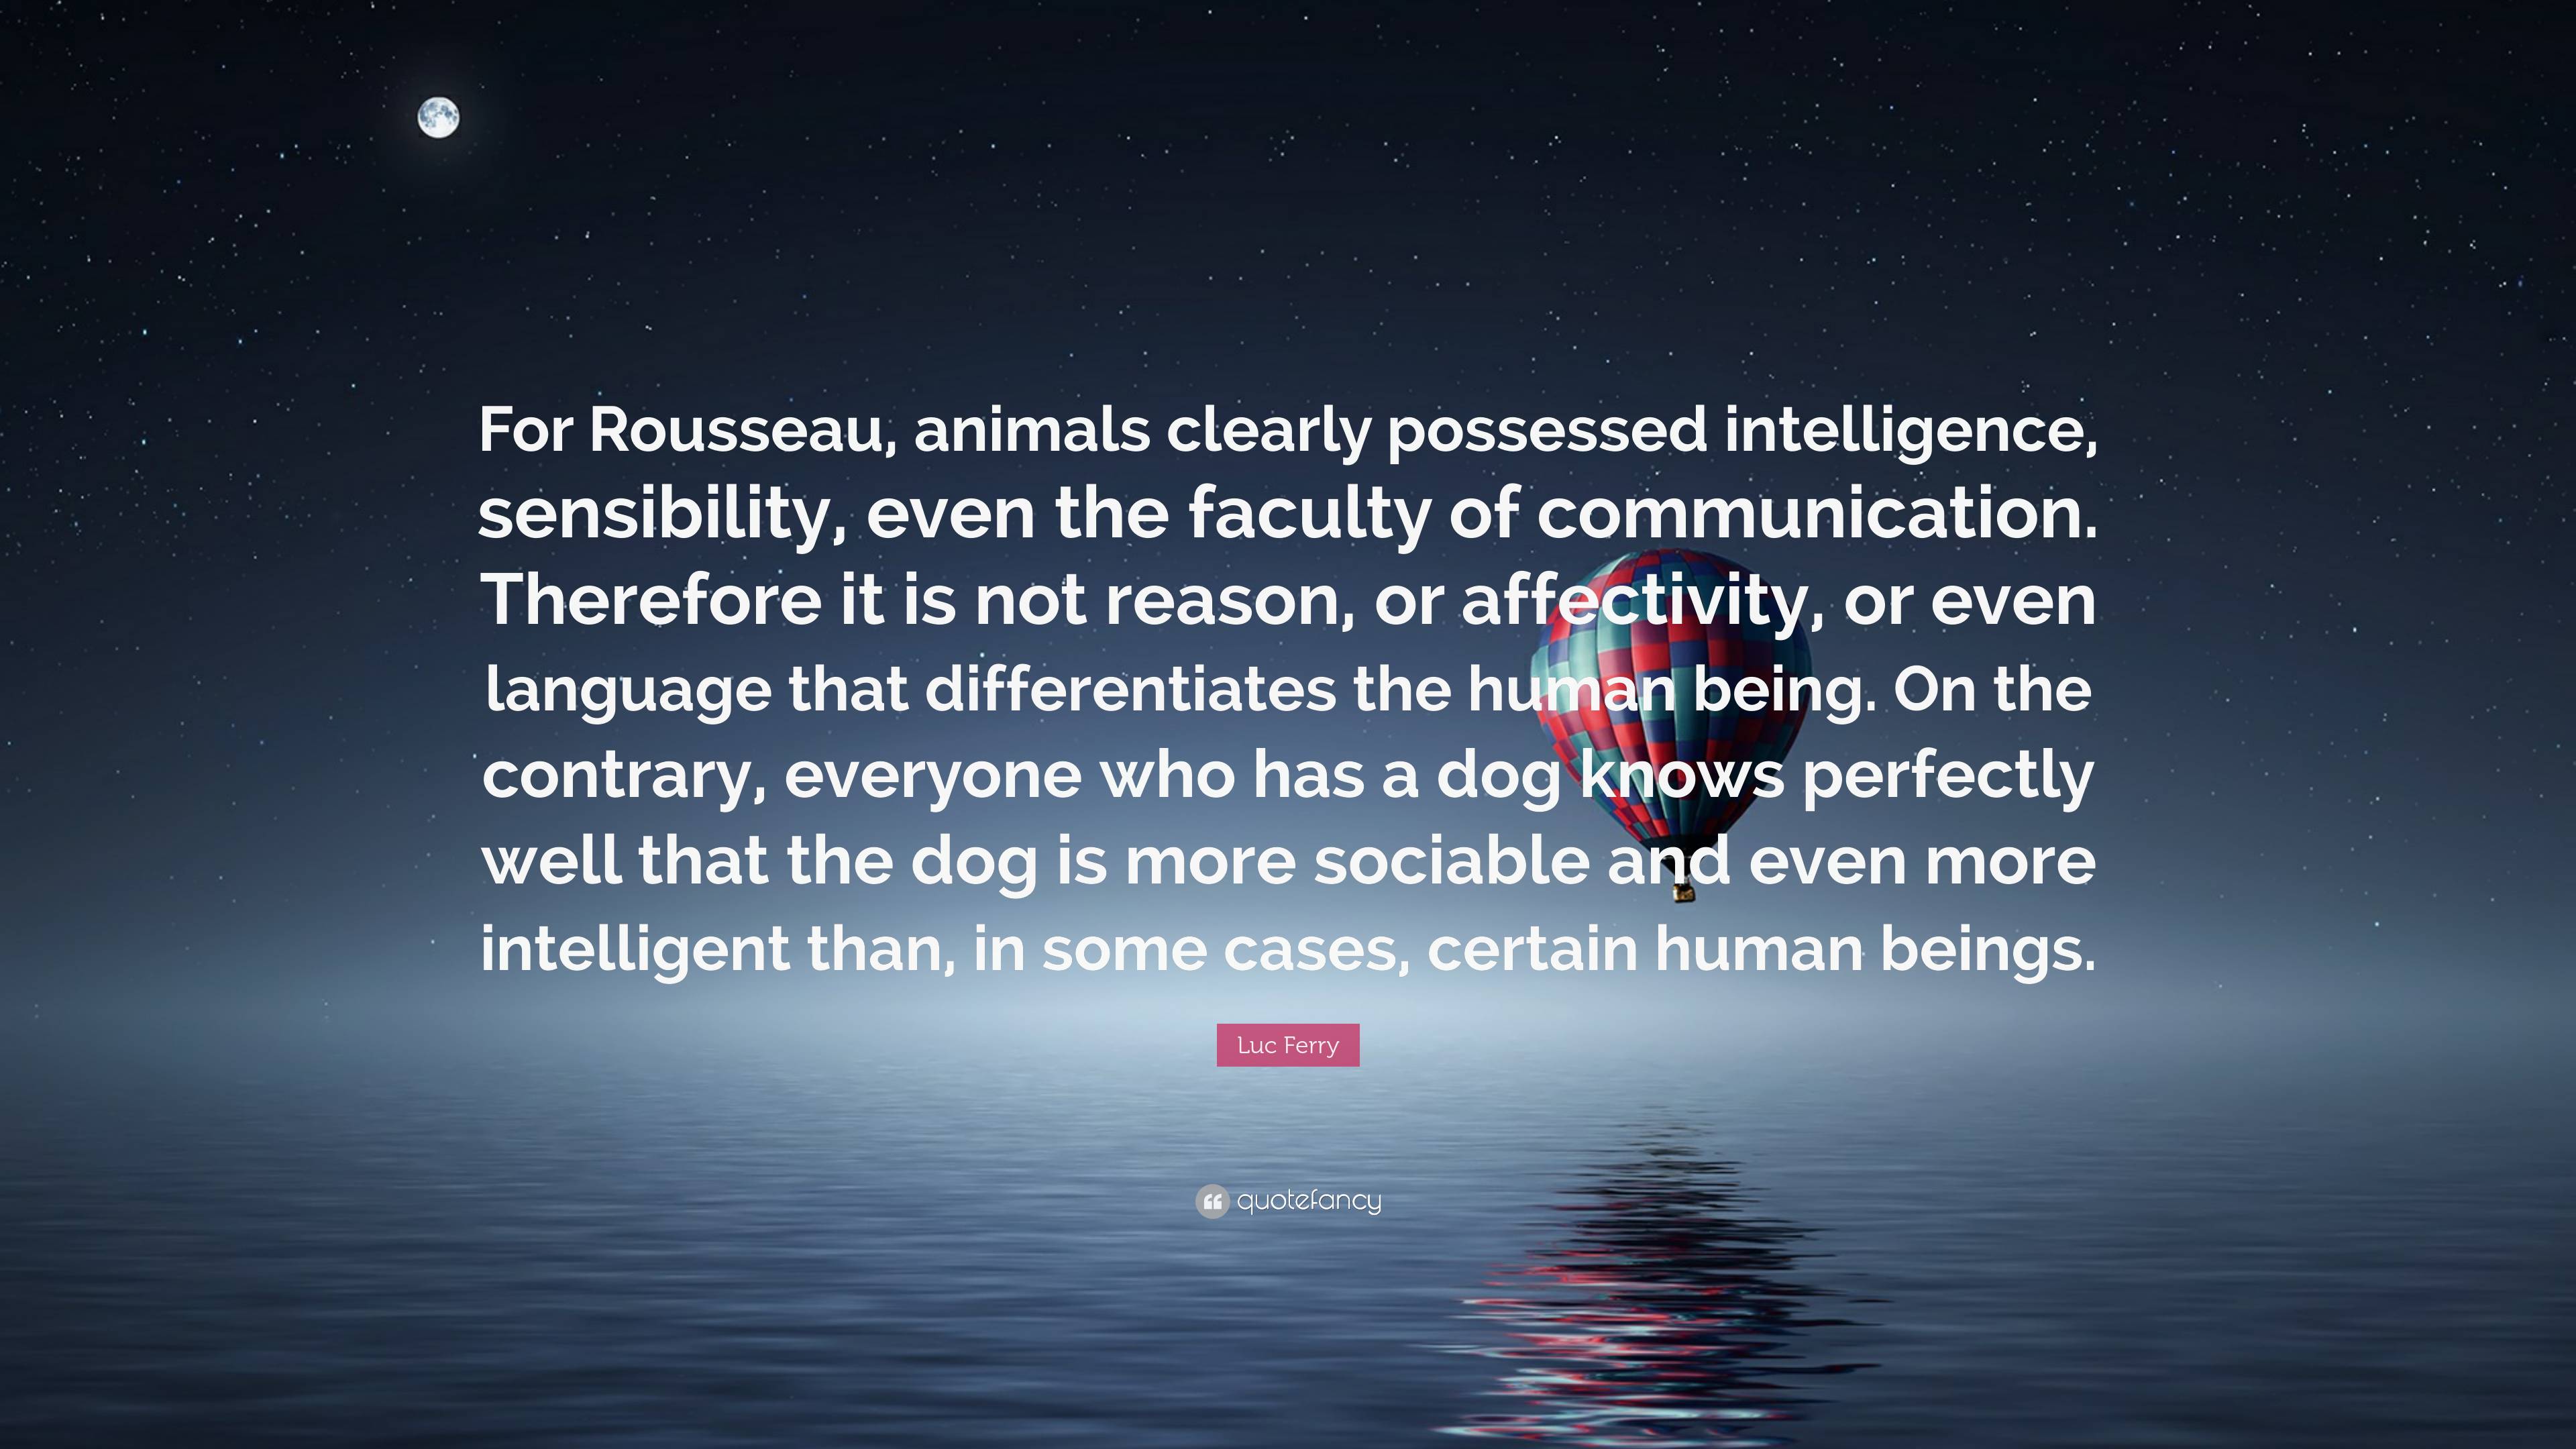 Luc Ferry Quote: “For Rousseau, animals clearly possessed intelligence,  sensibility, even the faculty of communication. Therefore it is no...”